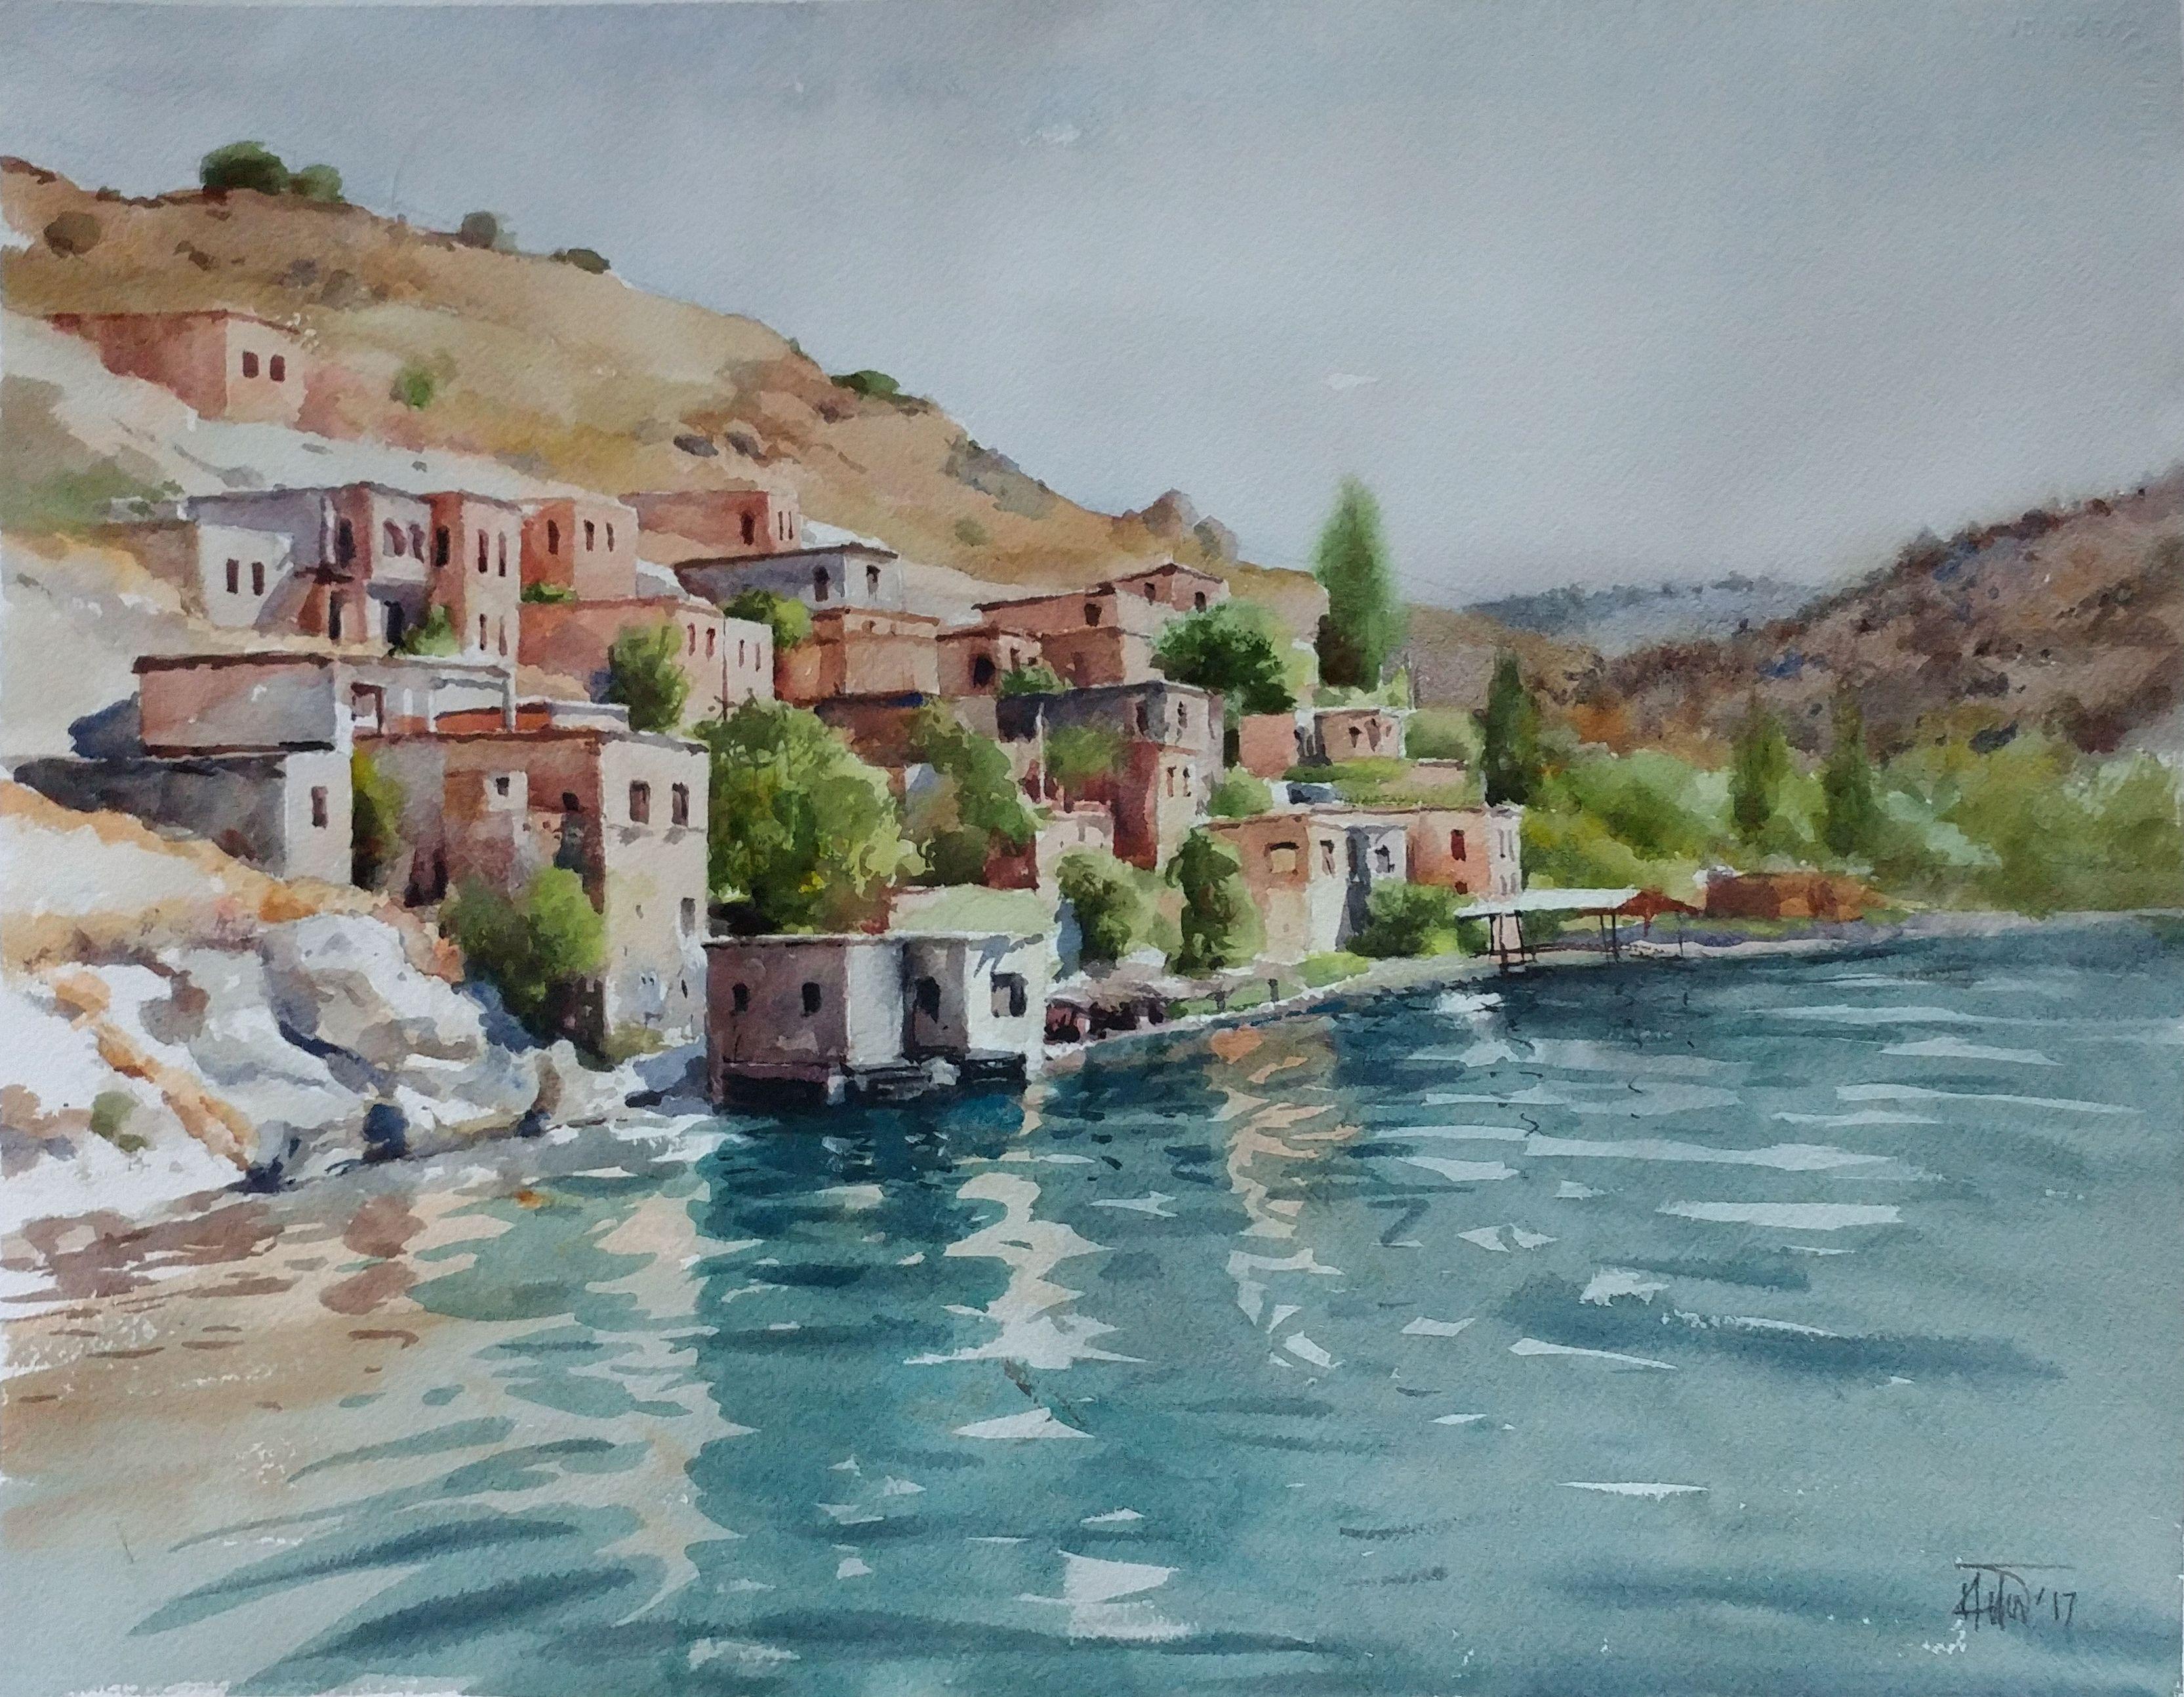 Gaziantep, Turkey, Painting, Watercolor on Watercolor Paper - Impressionist Art by Helal Uddin